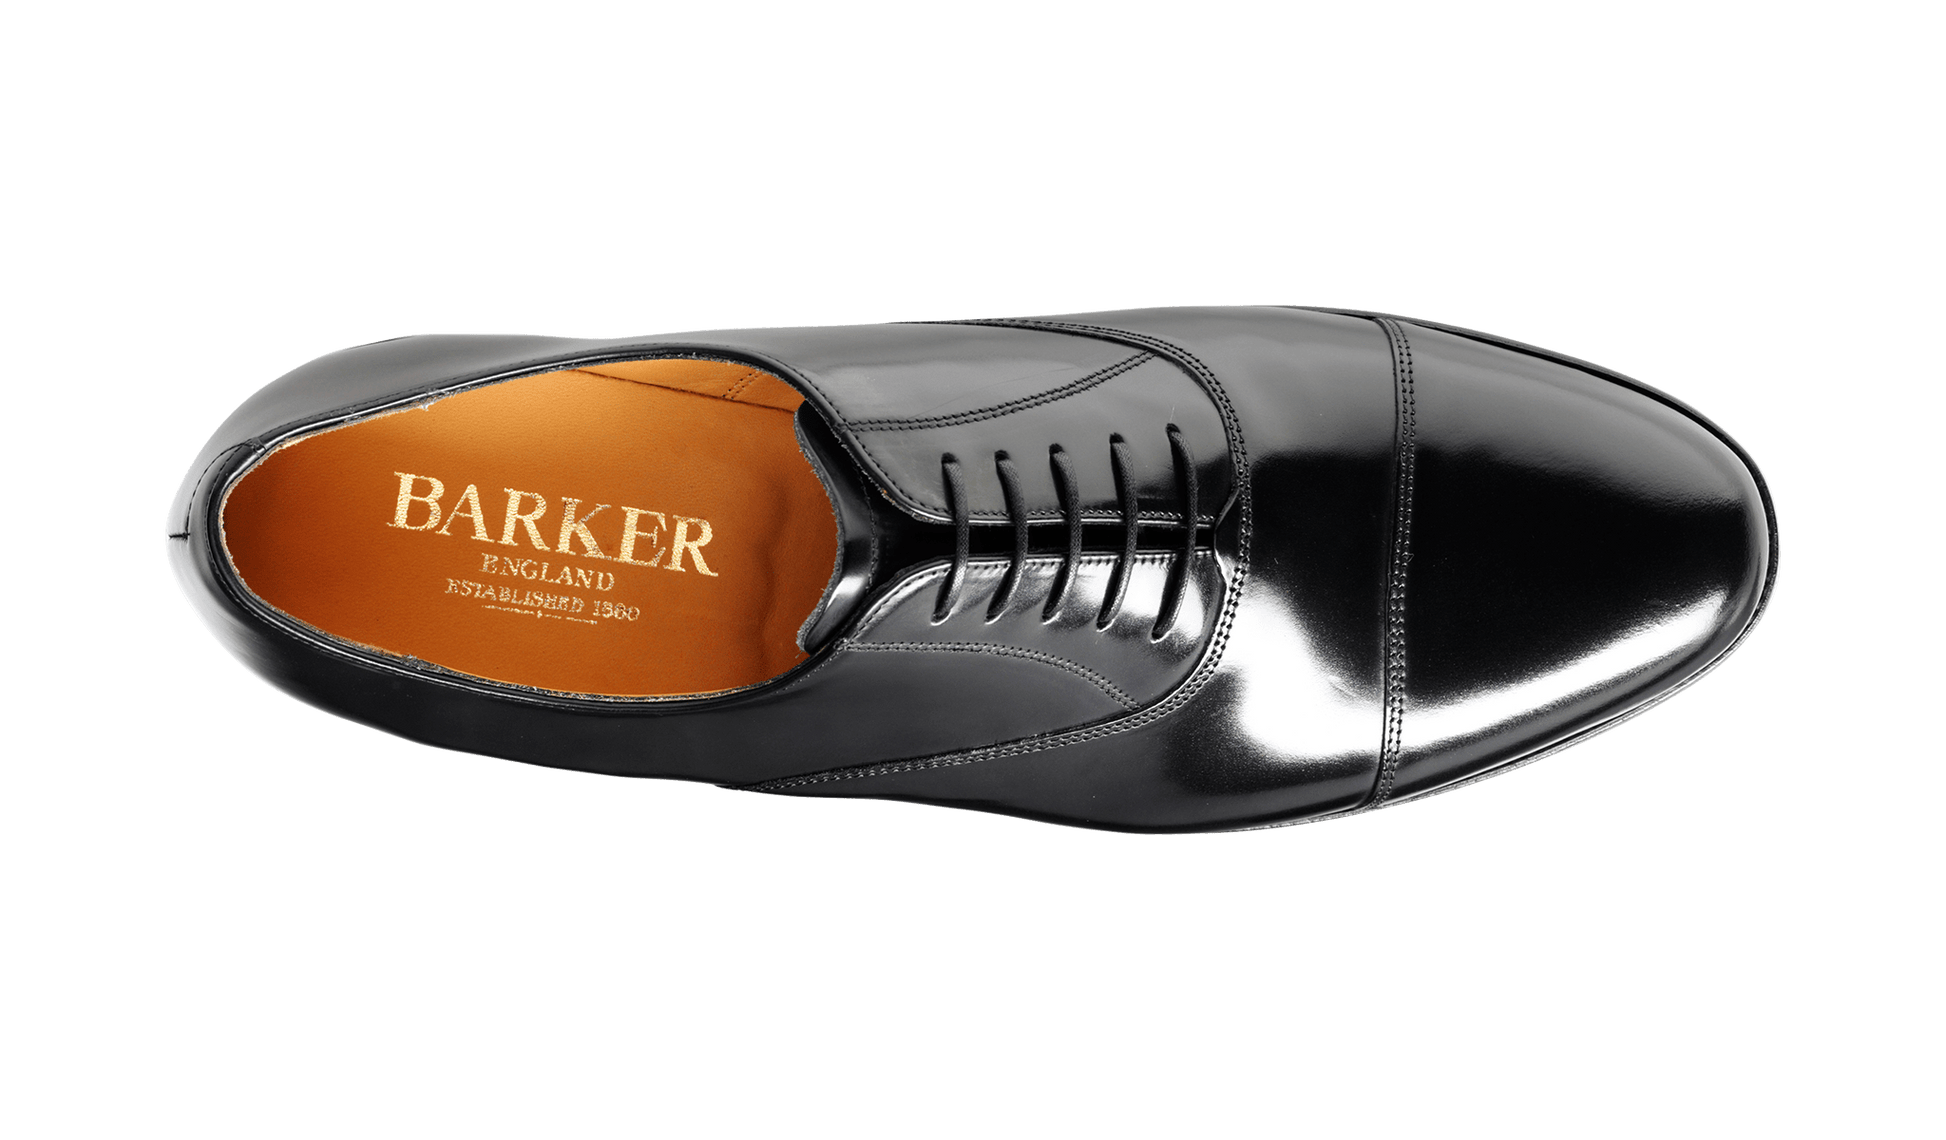 Barker Men's Arnold Leather Oxford Shoes 6644/37 - British Shoe Company